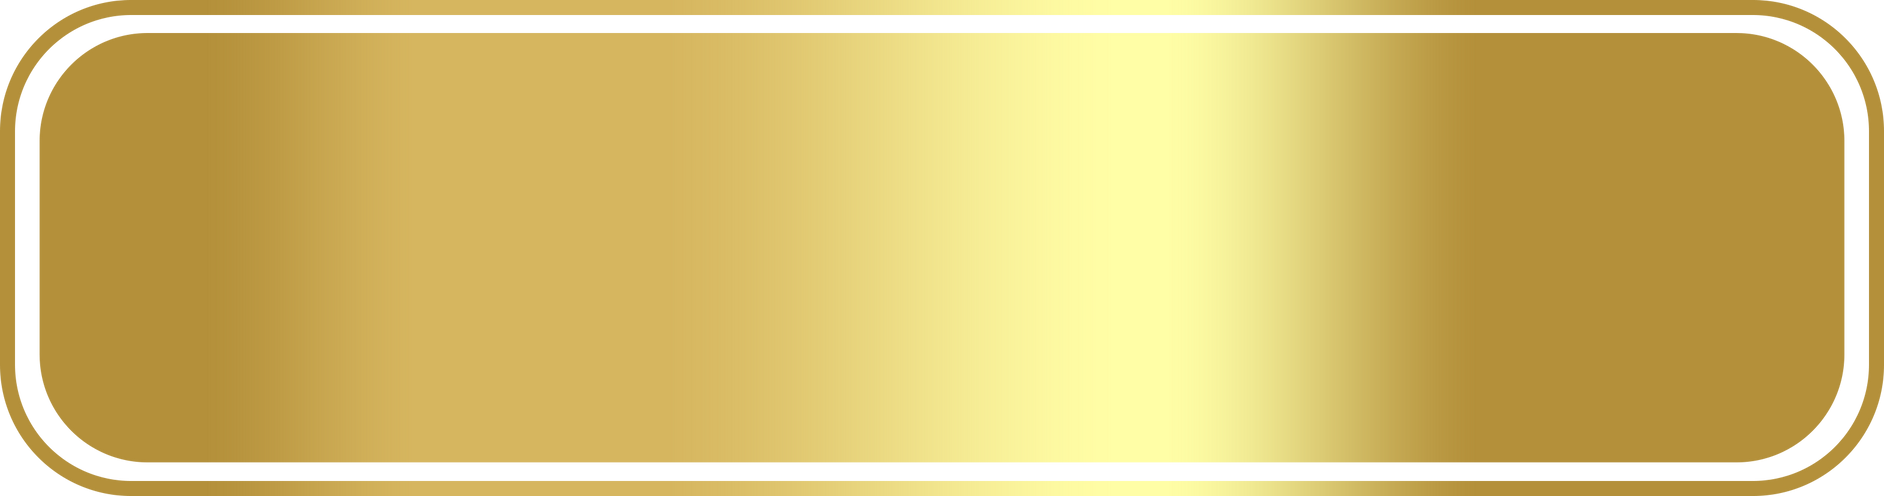 gold banner and bar